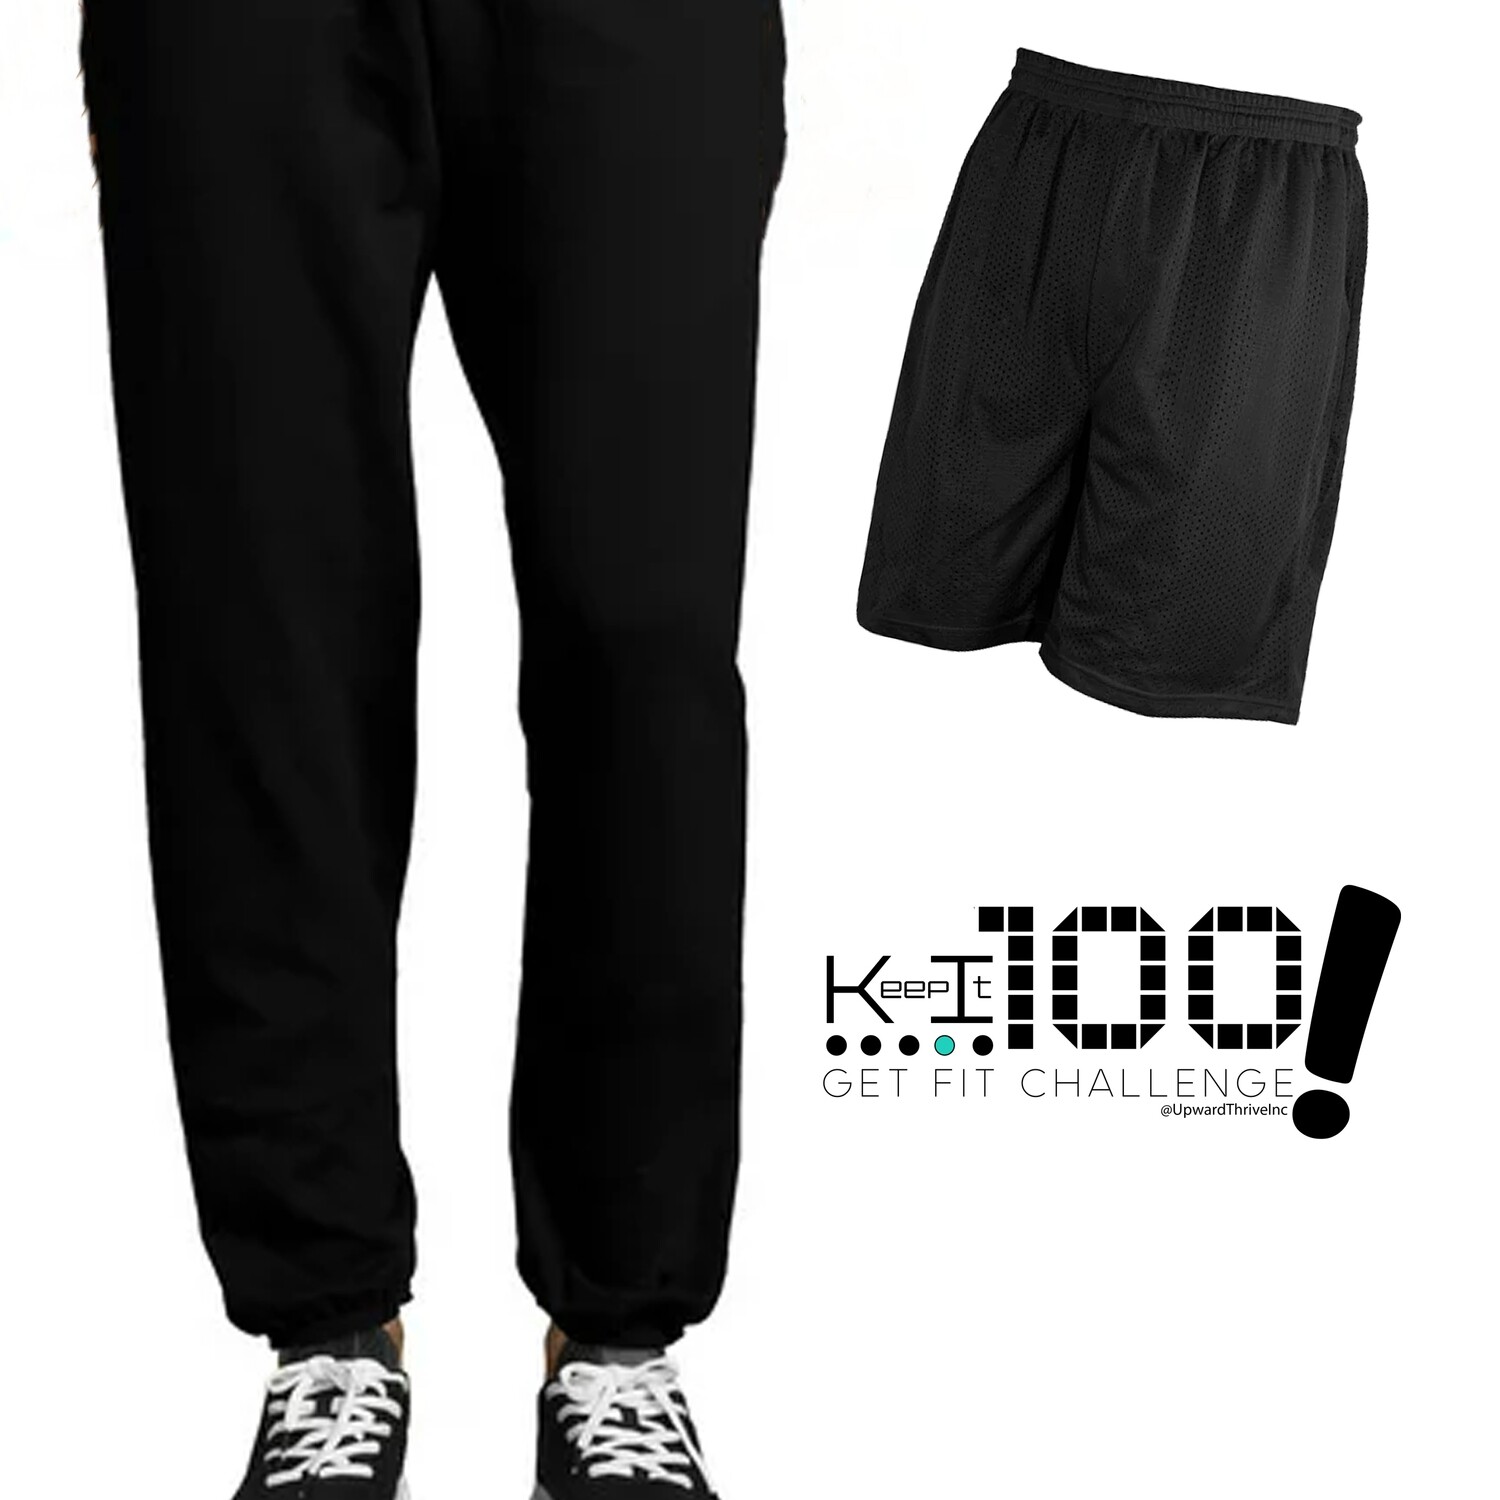 Keep It 100 Get Fit Course shorts/sweatpants (Use 100% discount code: PEHEALTHSHORTSPANTS)